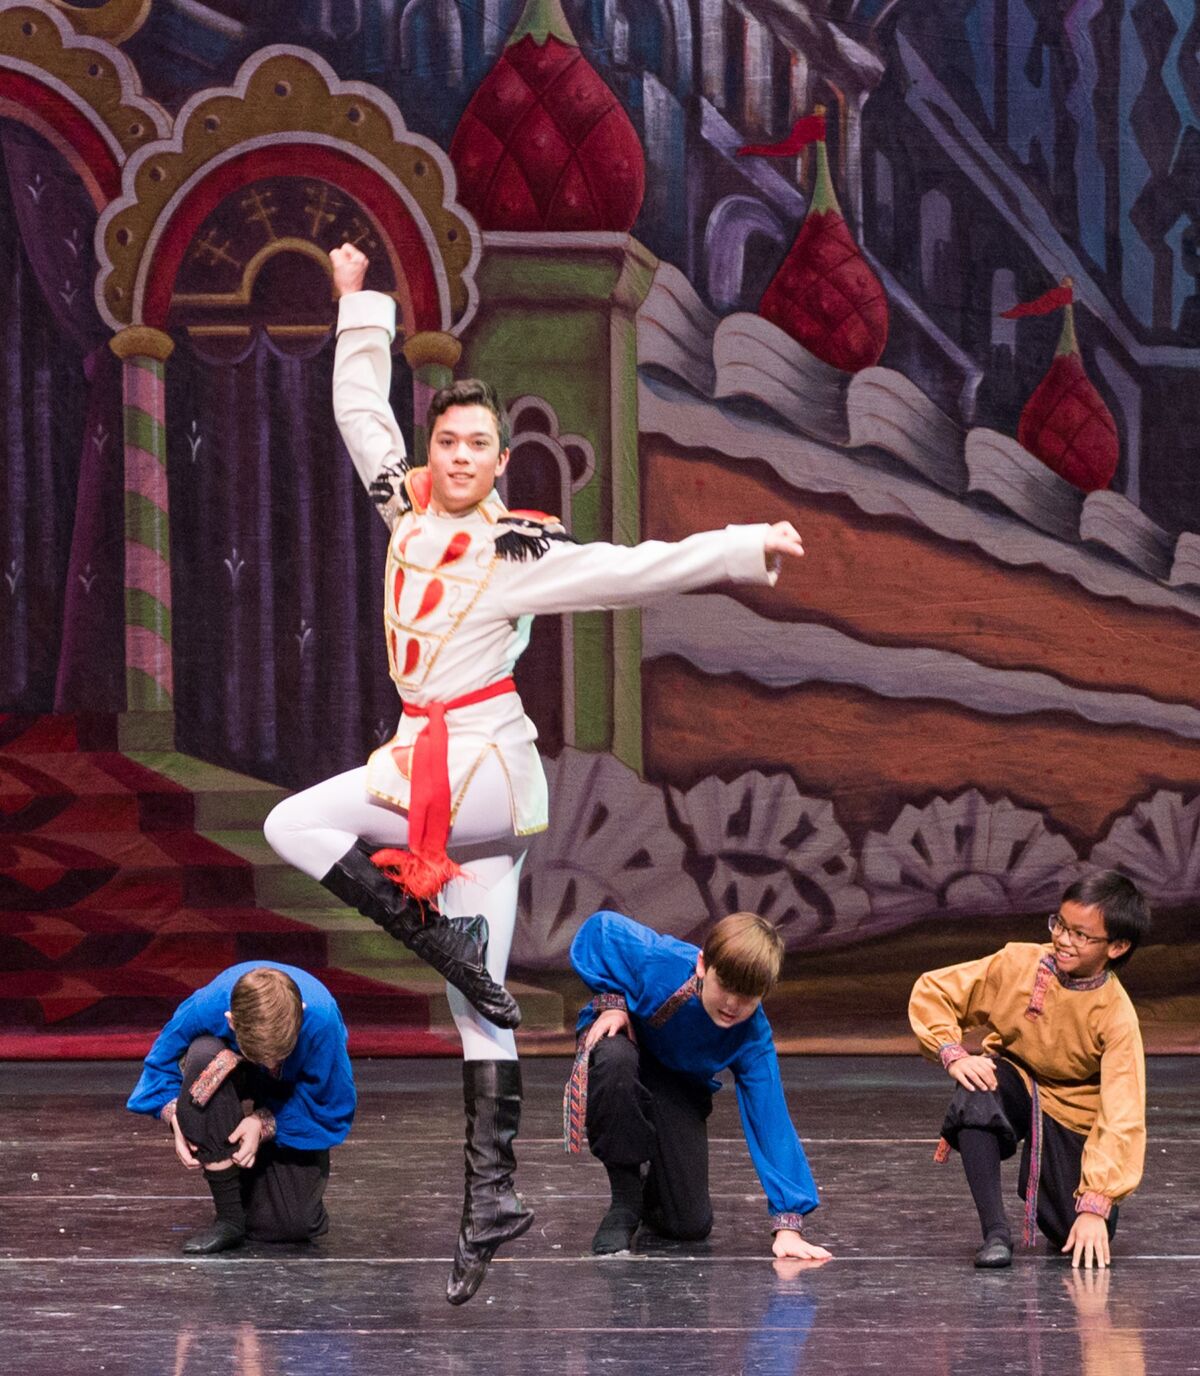 Zachary Ong was the Nutcracker Prince in Southern California Ballet’s 2021 production of “The Nutcracker.”